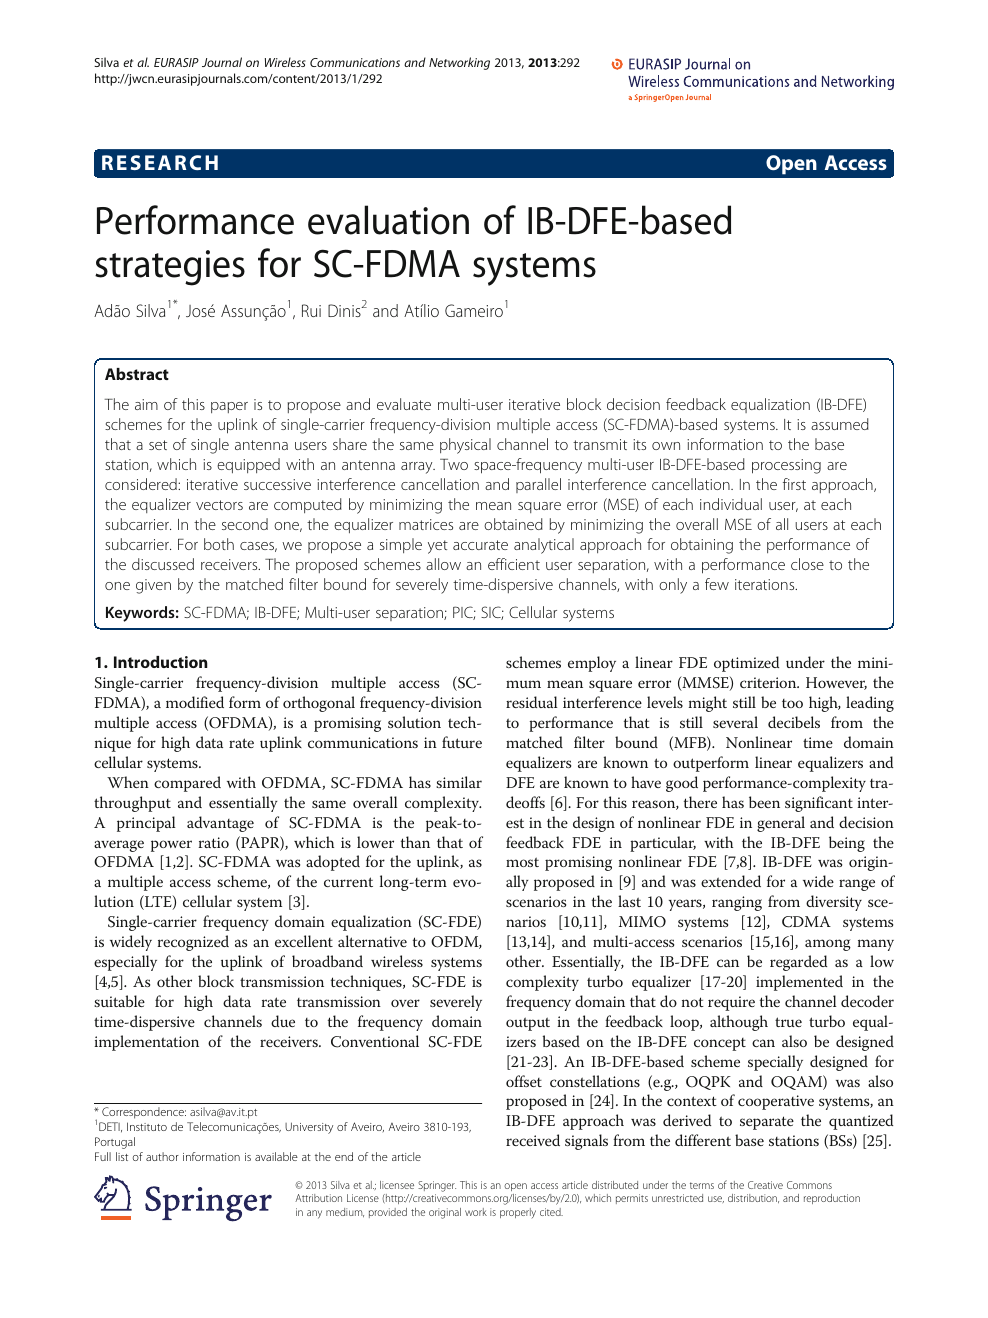 Performance evaluation of IB-DFE-based strategies for SC-FDMA systems –  topic of research paper in Electrical engineering, electronic engineering,  information engineering. Download scholarly article PDF and read for free  on CyberLeninka open science